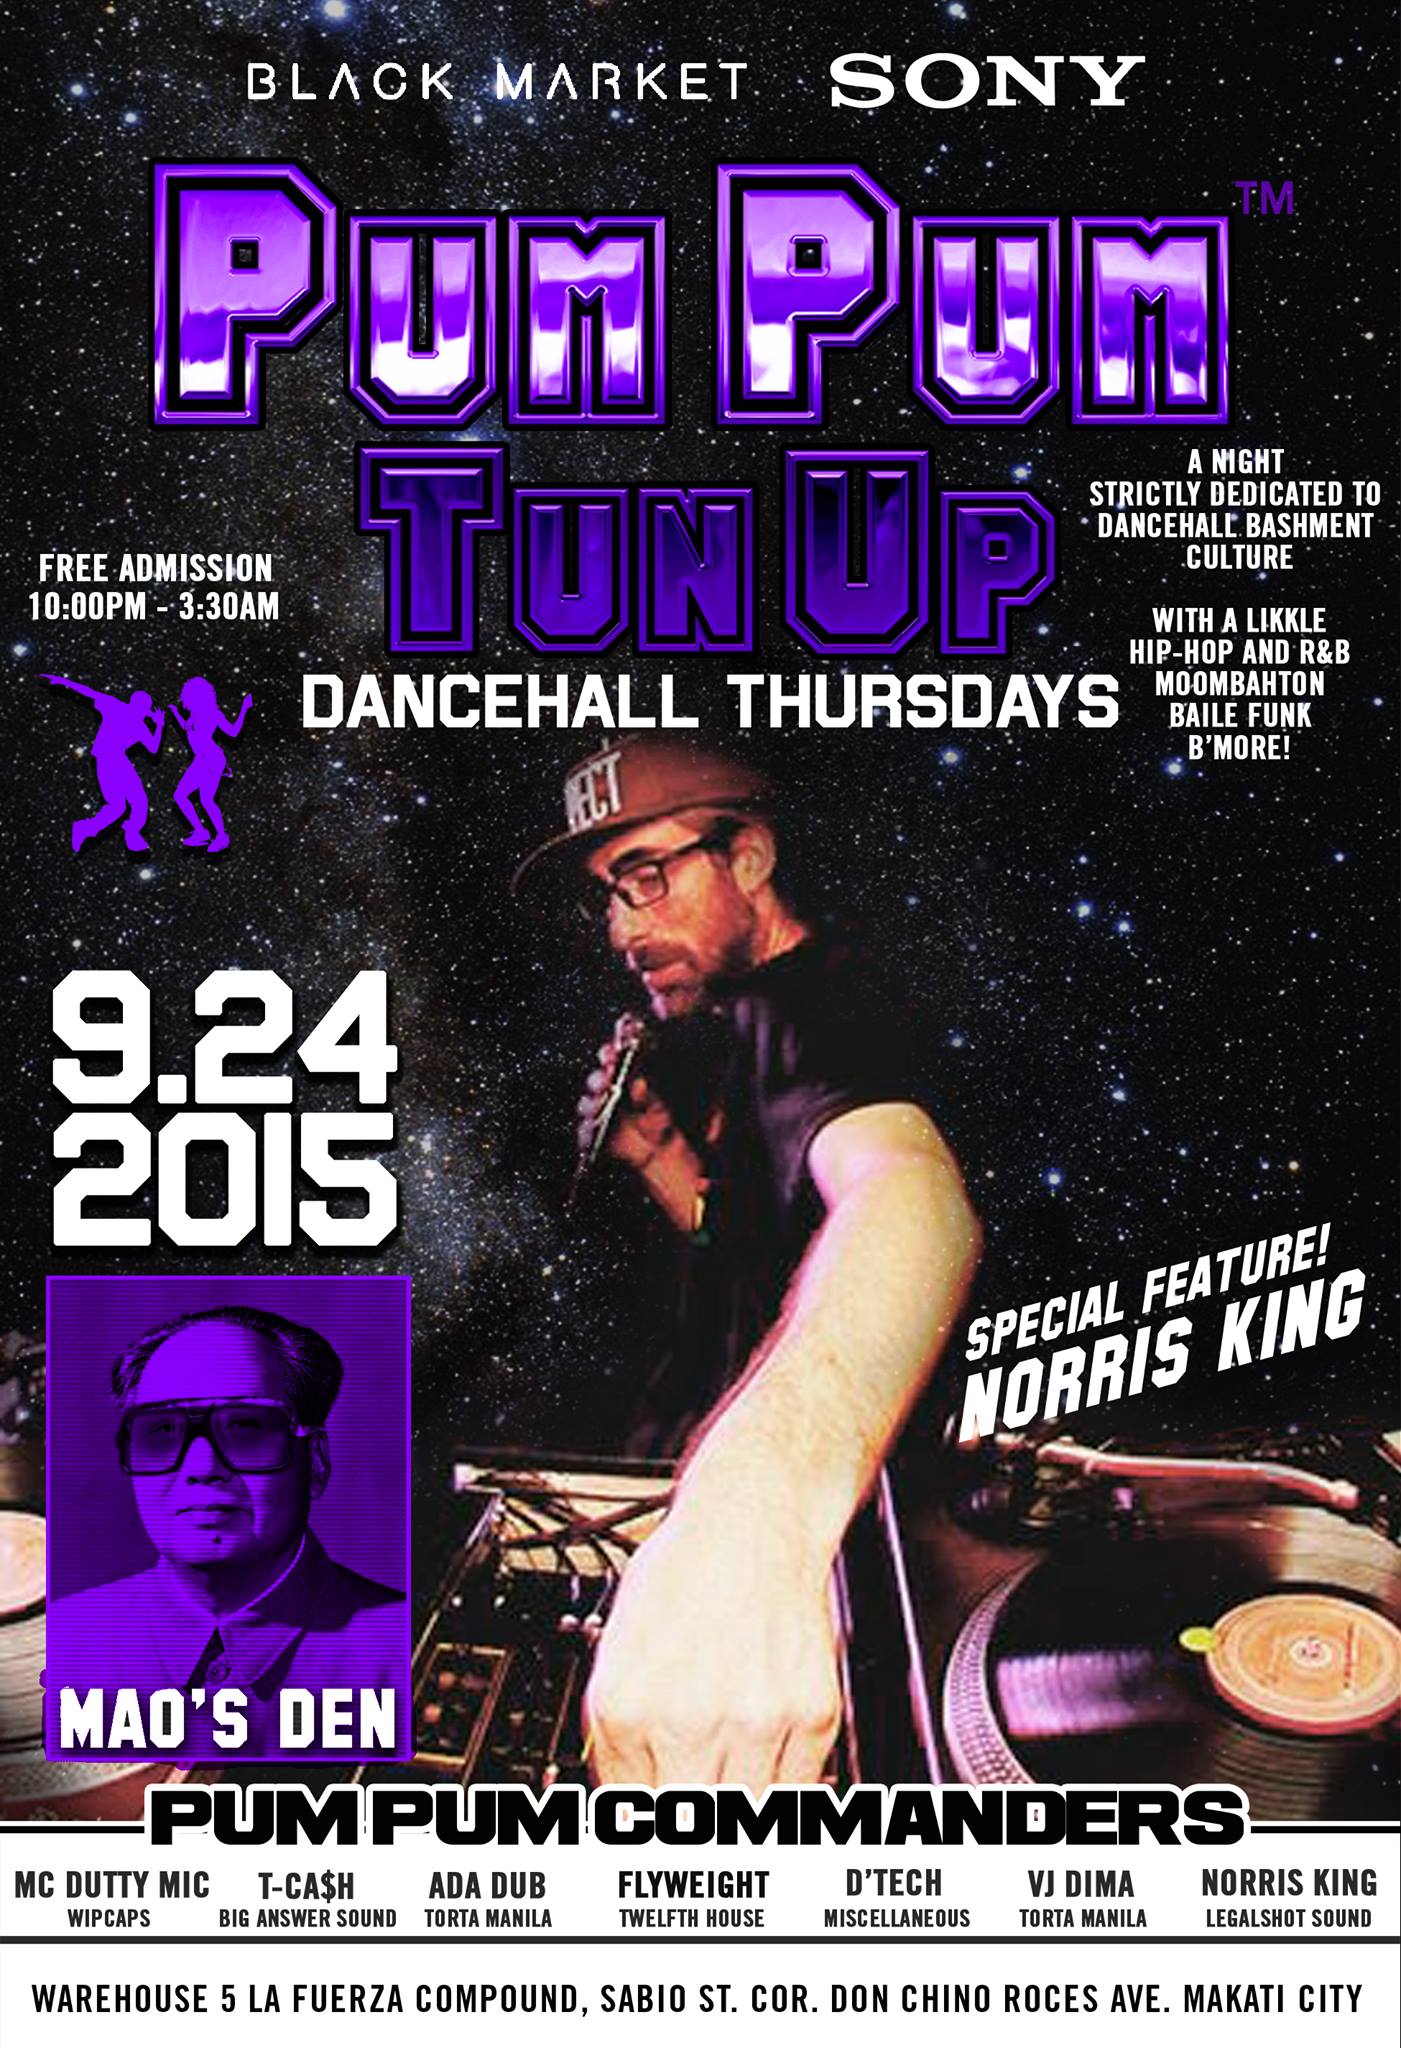 PUM PUM TUN UP (Mao Den) Thursday, September 24 at 10:00pm 2 days from now · 89°F / 76°F Chance of a Thunderstorm Show Map Black Market WAREHOUSE 5, LA FUERZA COMPOUND 2, SABIO ST., Makati, Philippines A Night Strictly Dedicated To Dancehall Bashment Culture With A Likkle Moombahton + Baile Funk + B'more + Hip-Hop & R&B! Pum Pum Commanders: • FLYWEIGHT (The Twelfth House) • ADADUB (Distraktors) • D'TECH (Miscellaneous) • T-KA$H (Big Answer Sound) • NORRIS KING (Legal Shot Sound) • MC DUTTY MIKE (WIP Caps) Hosted by: • PHATTY MARIA (Dancehall Queen) ••• CALLING ALL DANCEHALL MASSIVE INNA YARD... IT'S BASHMENT TIME ••• FREE ENTRANCE! NO COVER, ALL CULTURE!